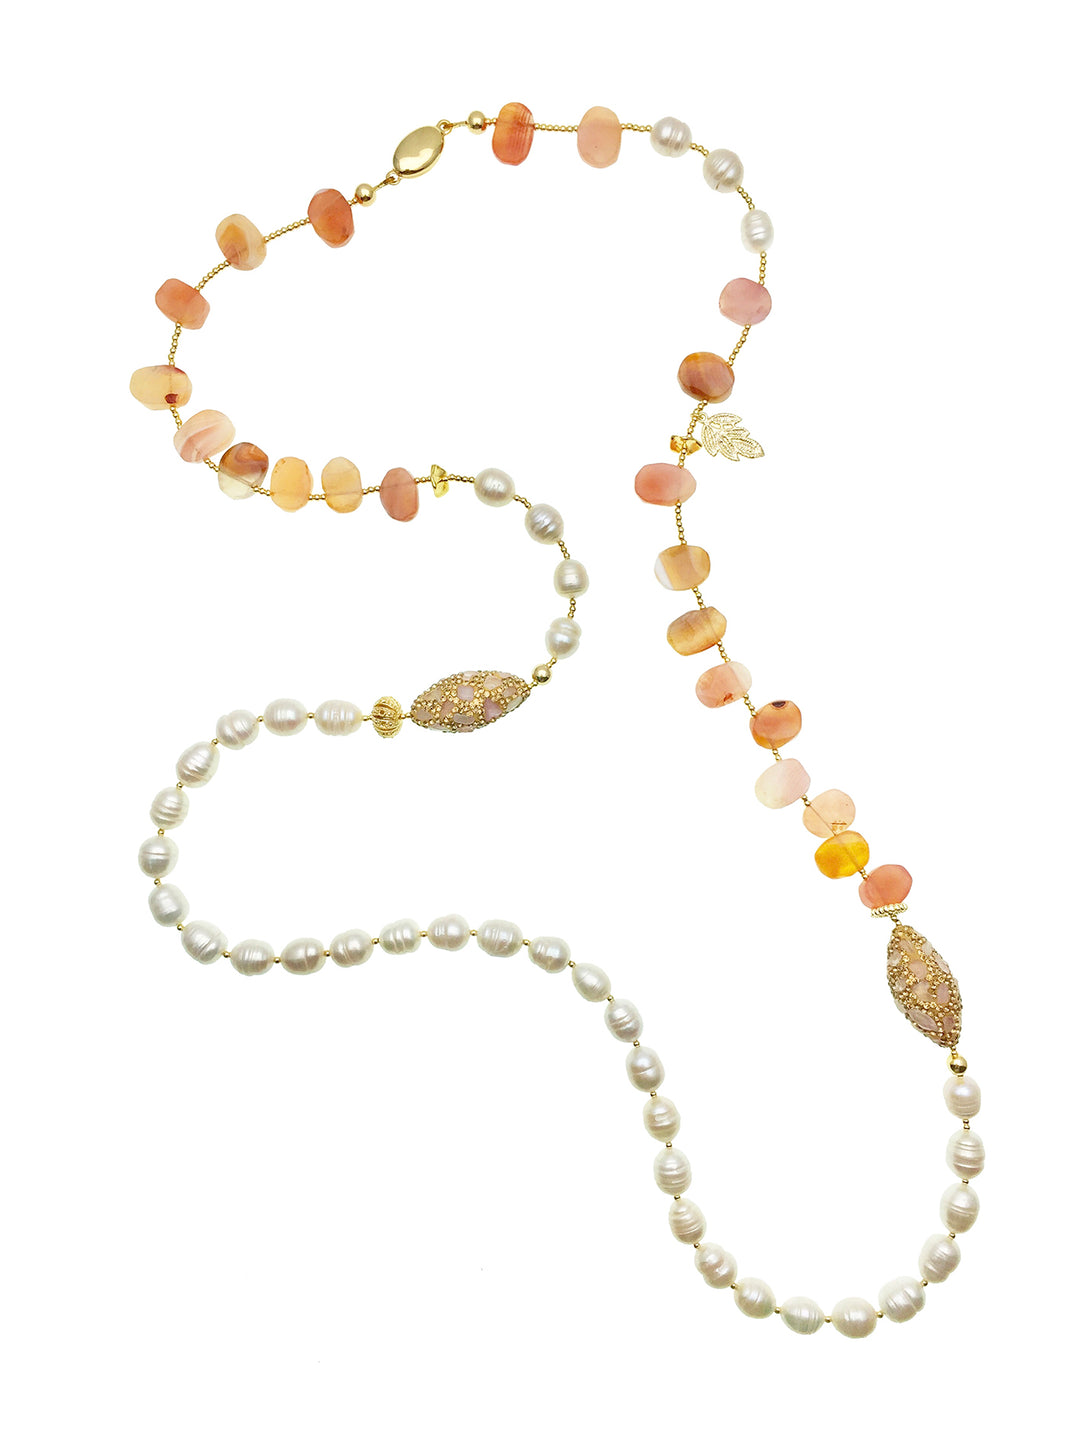 Orange Agate With Freshwater Pearls And Rhinestones Multi-Way Necklace AN002 - FARRA